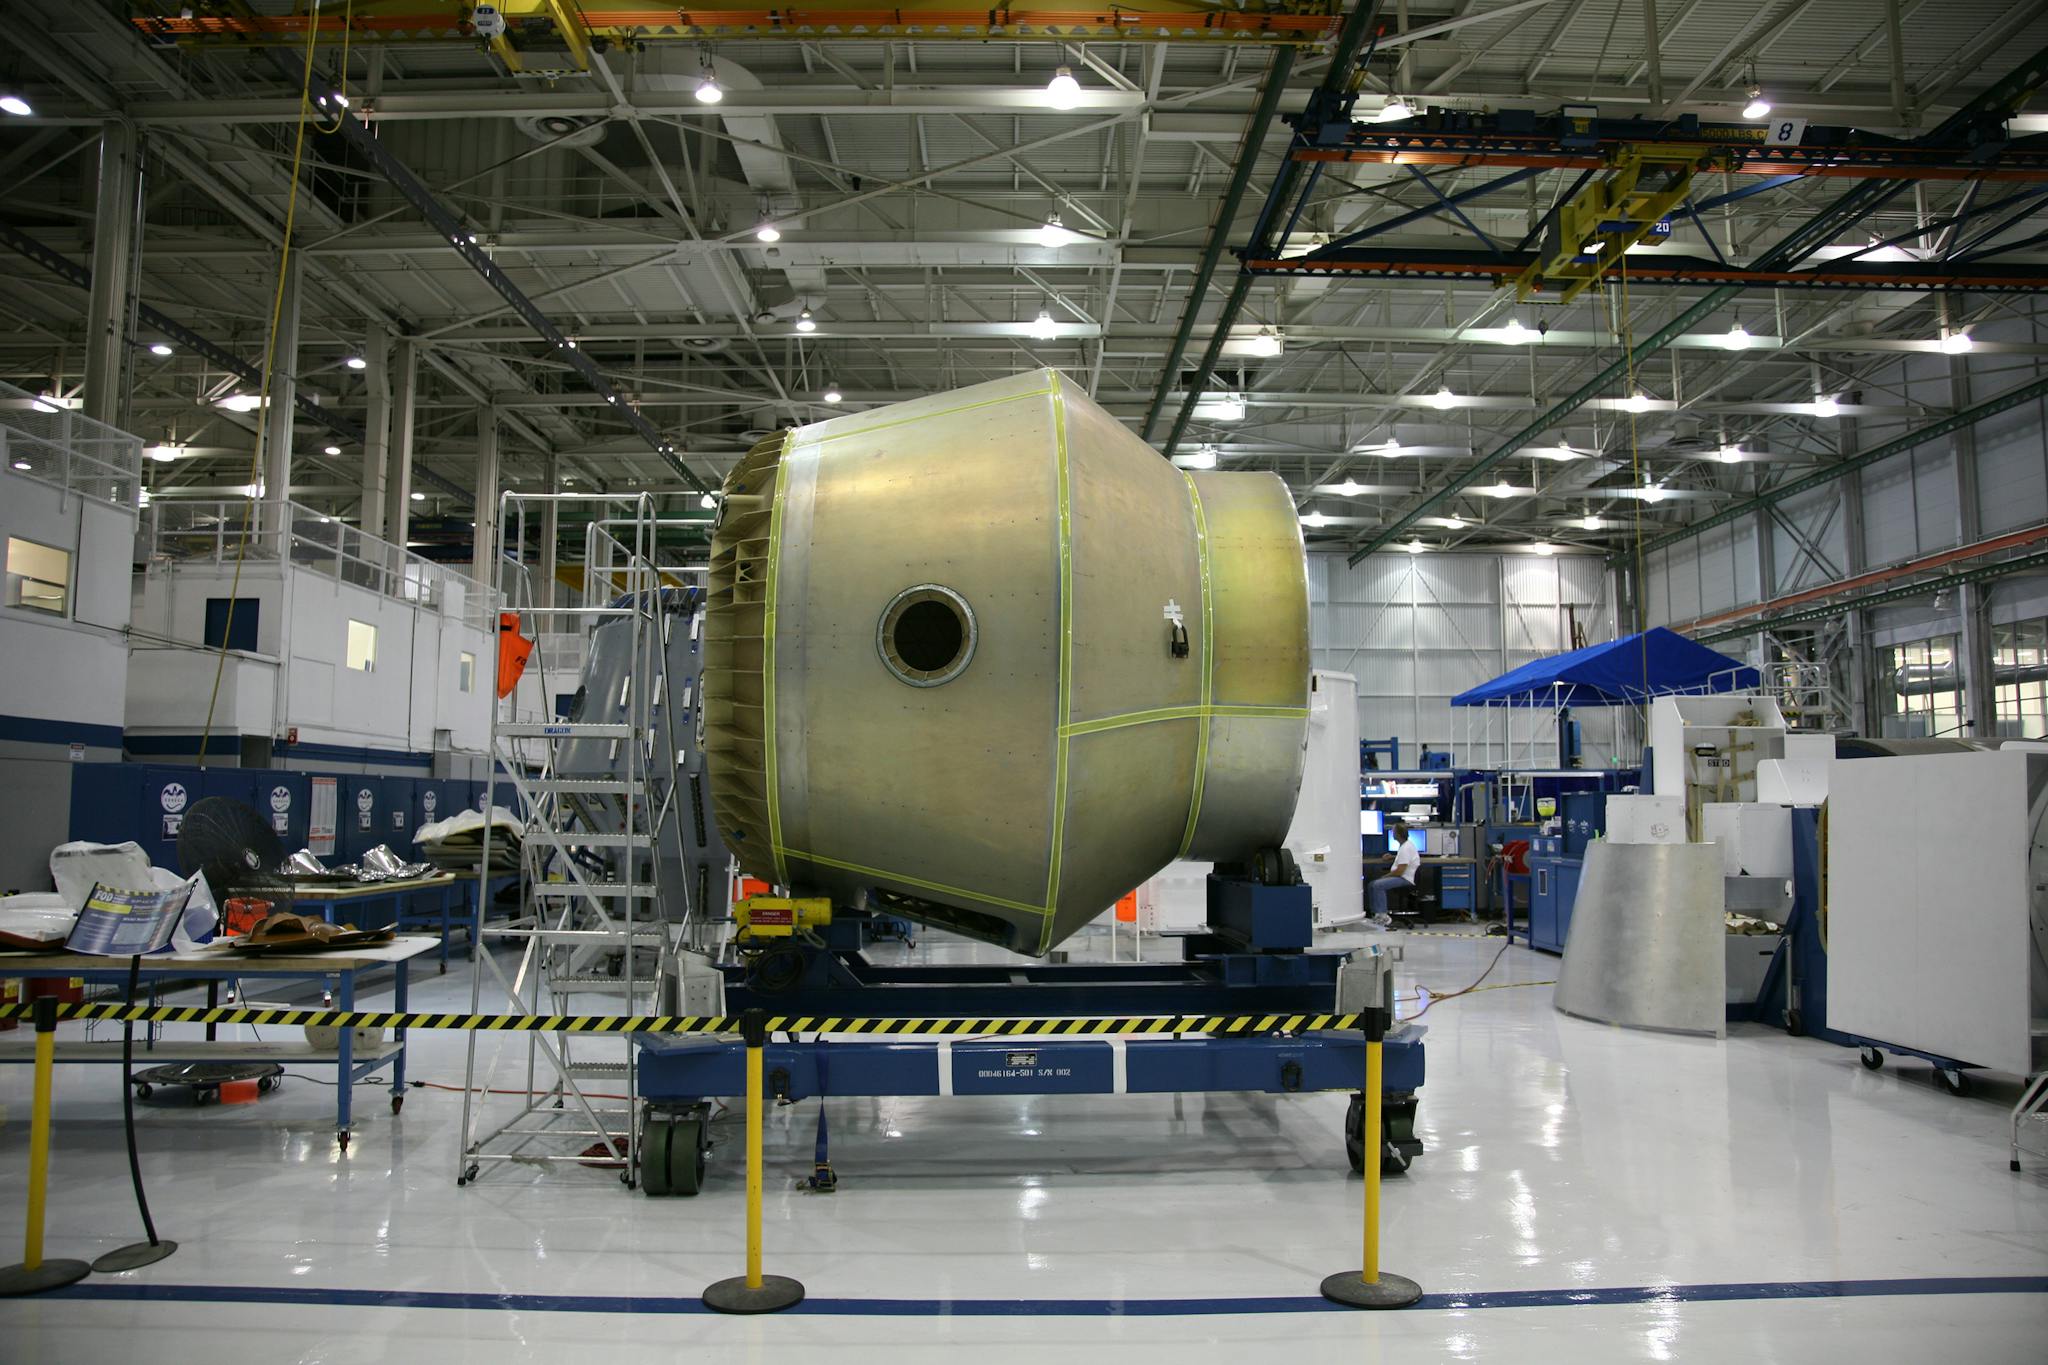 Heavy detail of spacecraft placed on rolling platform under construction at futuristic rocket factory